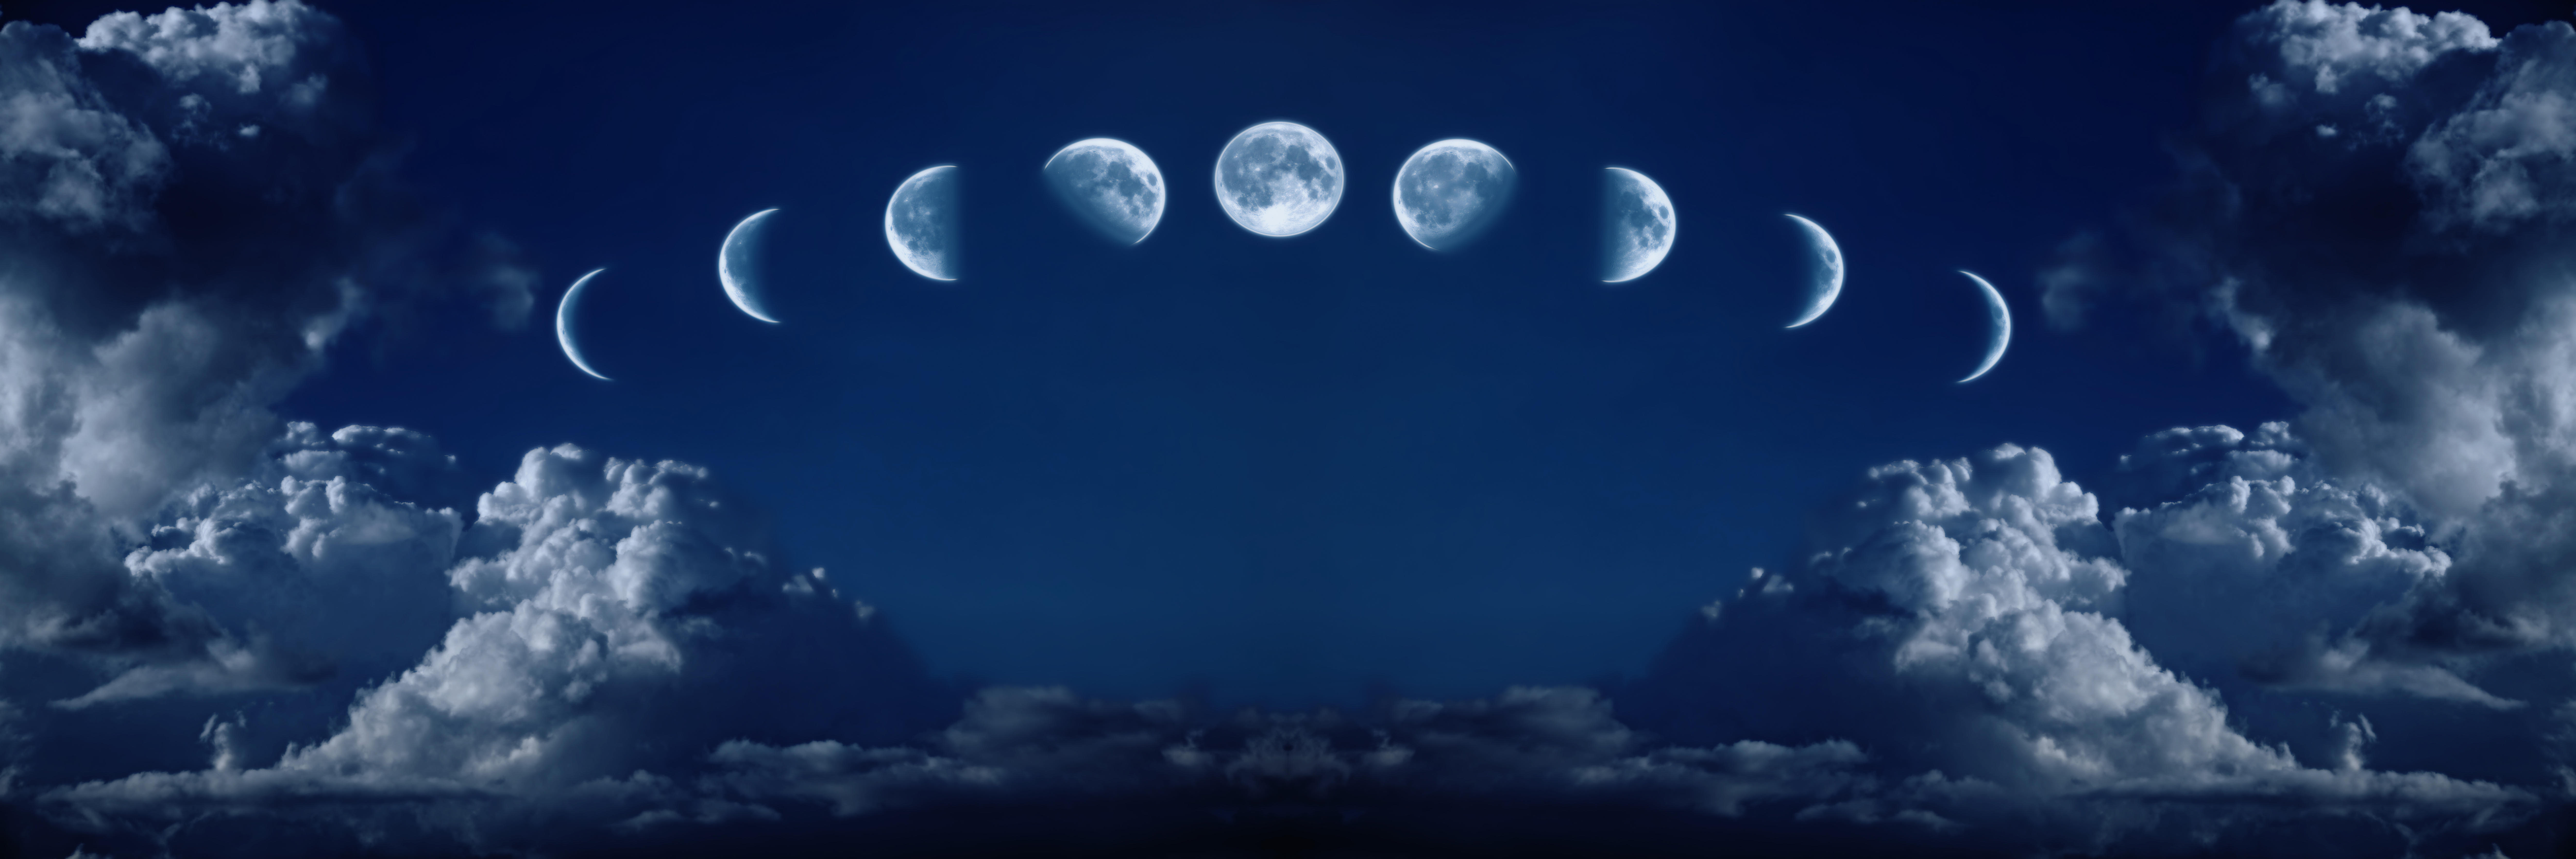 Nine phases of the full growth cycle of the moon – Anne Ortelee Astrology11000 x 3667